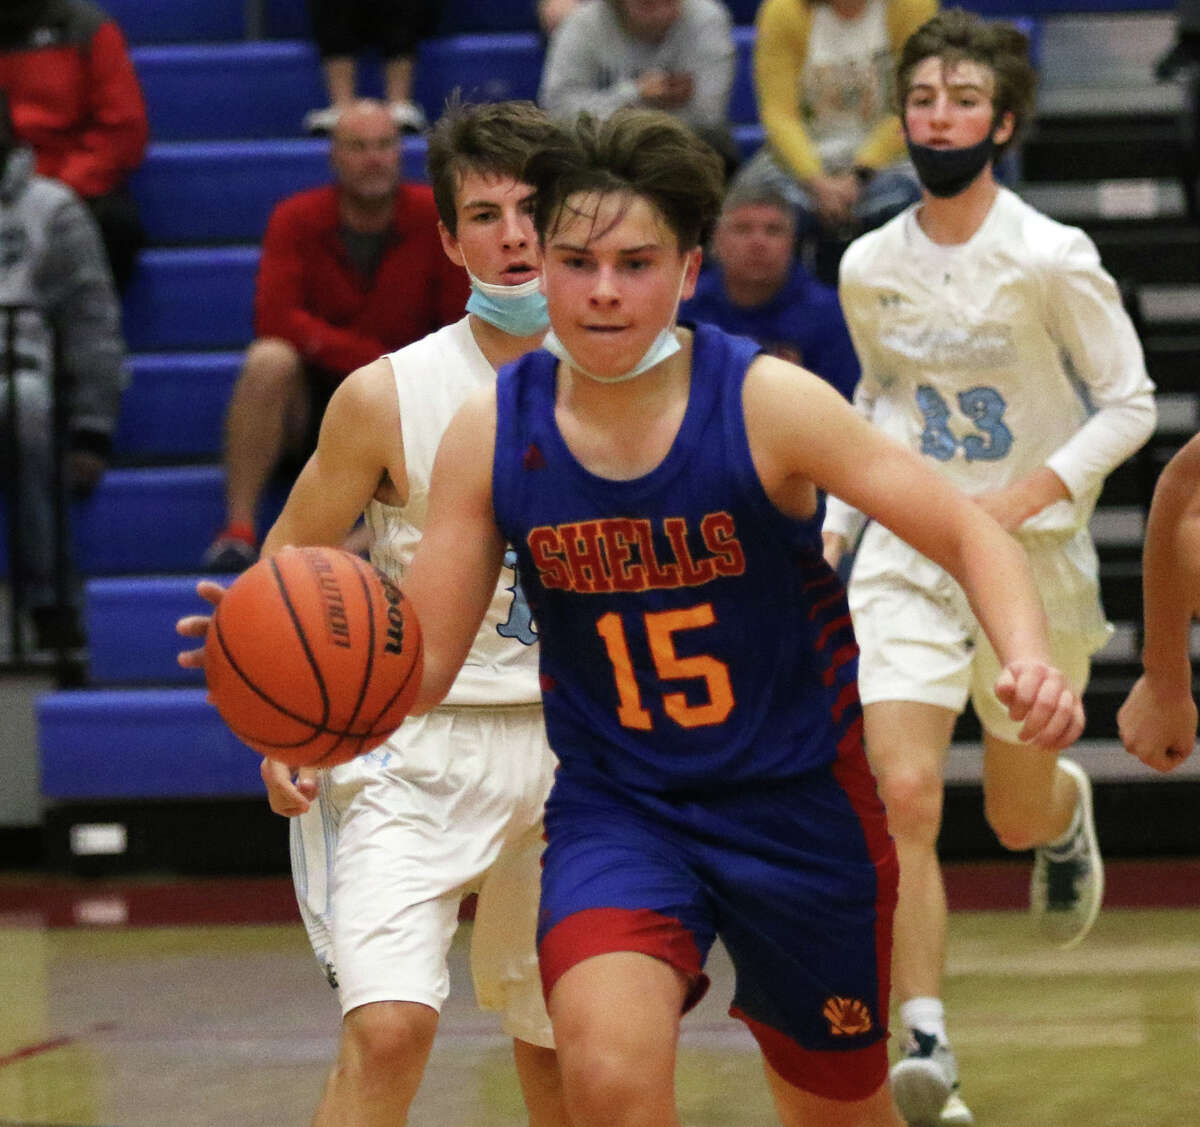 Roxana's Chris Walleck (15) pushes the ball upcourt in a game last month against Jersey at the Roxana Tourney. The Shells were at home Friday, playing their first game since Nov. 30 because of covid exposure, and lost to EA-WR. It was the Oilers' first game since Dec. 1.